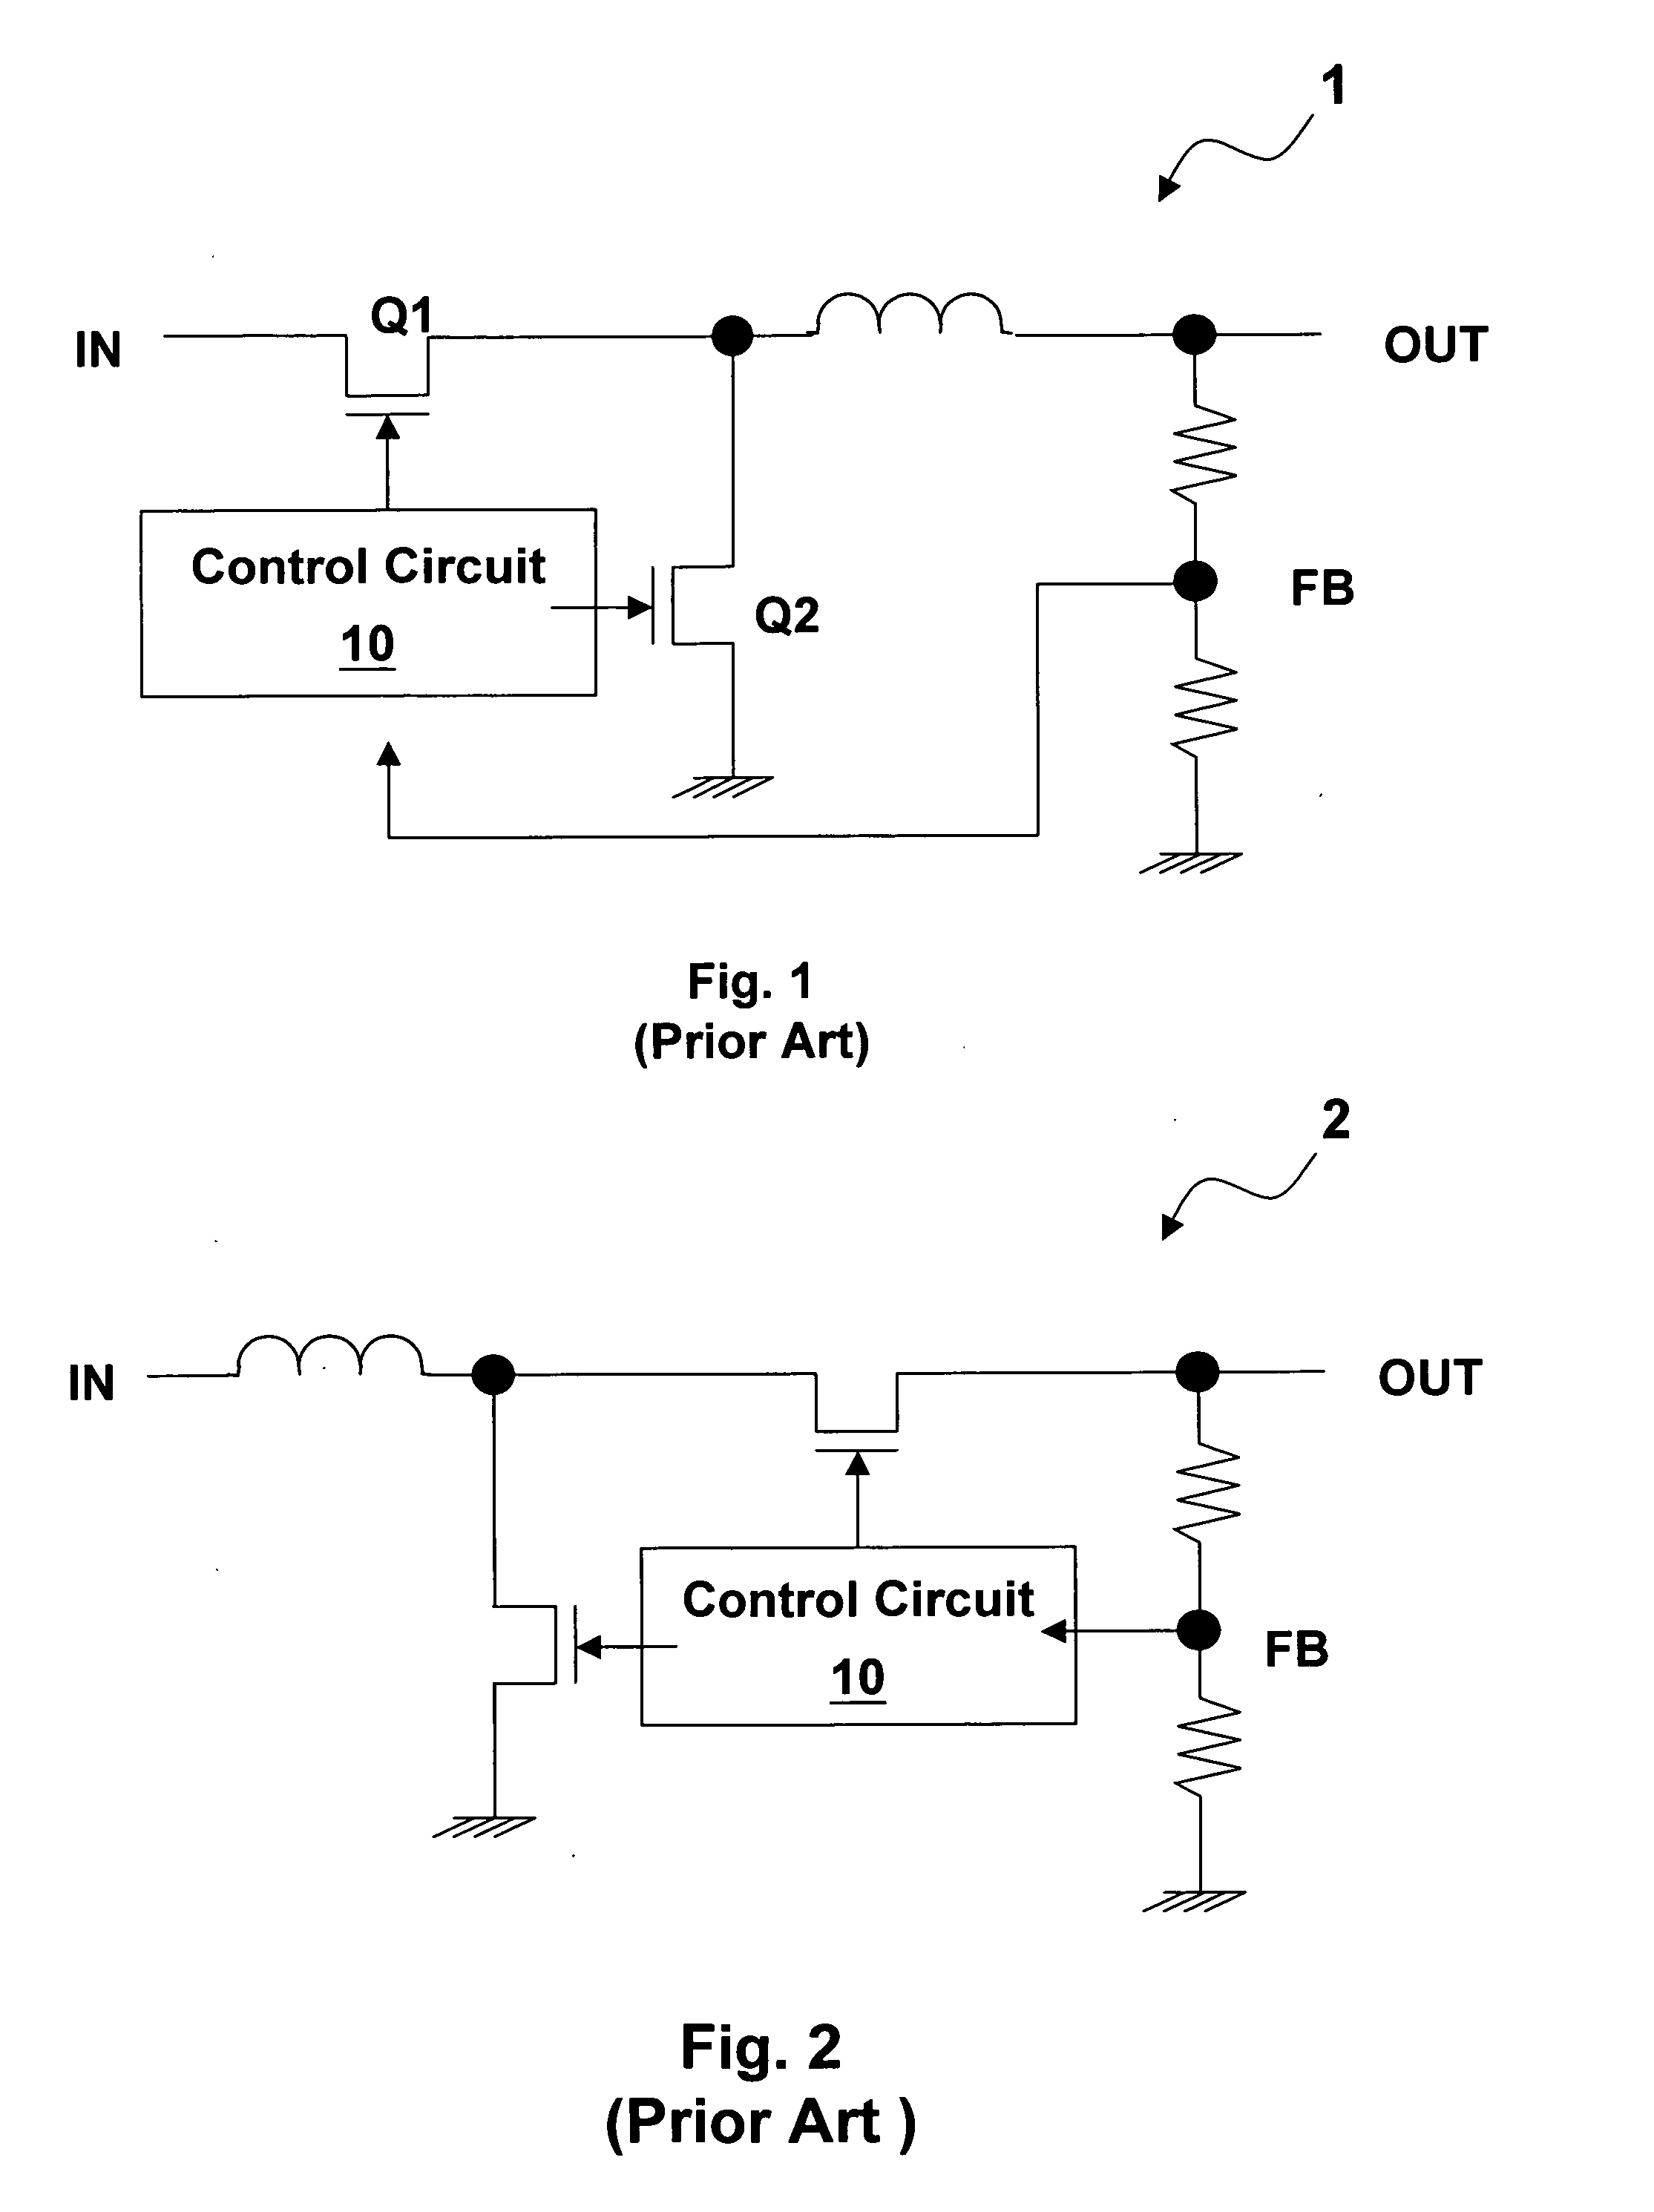 Power converter with improved line transient response, control circuit for power converter, and method for improving line transient response